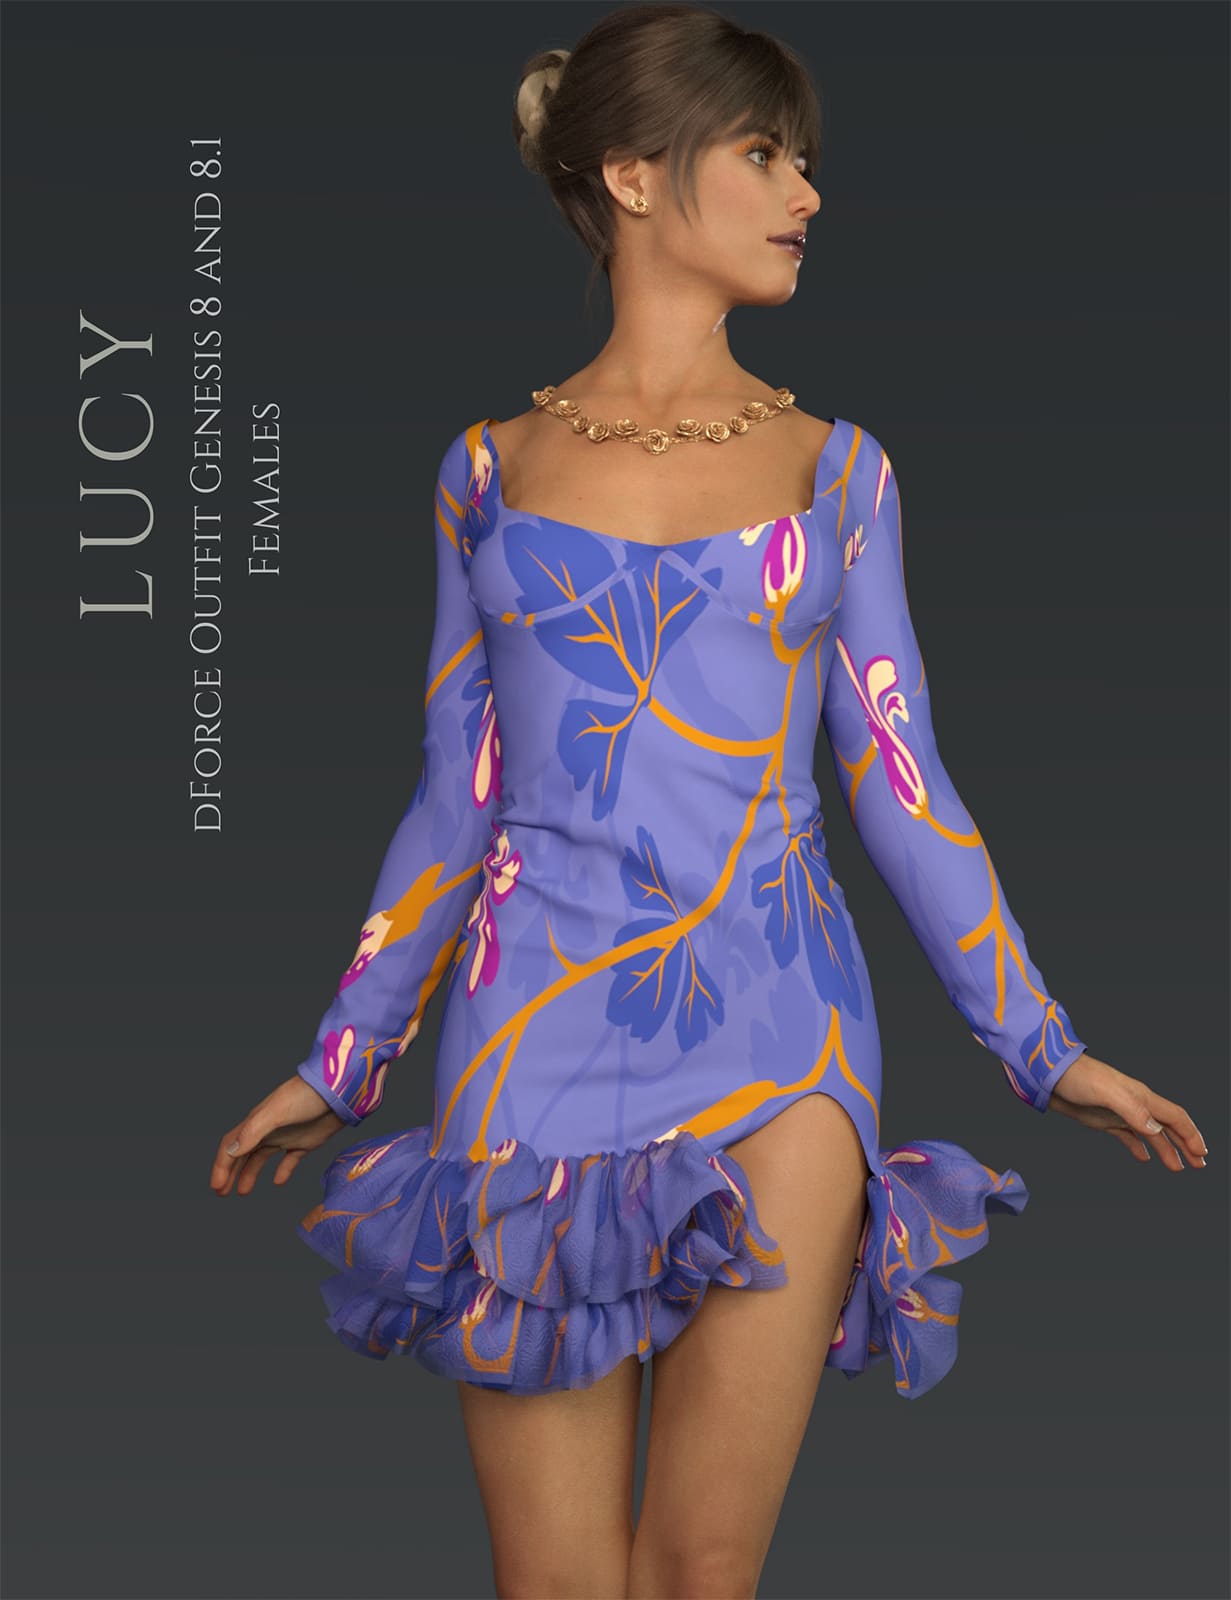 dForce Lucy Outfit for Genesis 8 & 8.1 Females_DAZ3D下载站